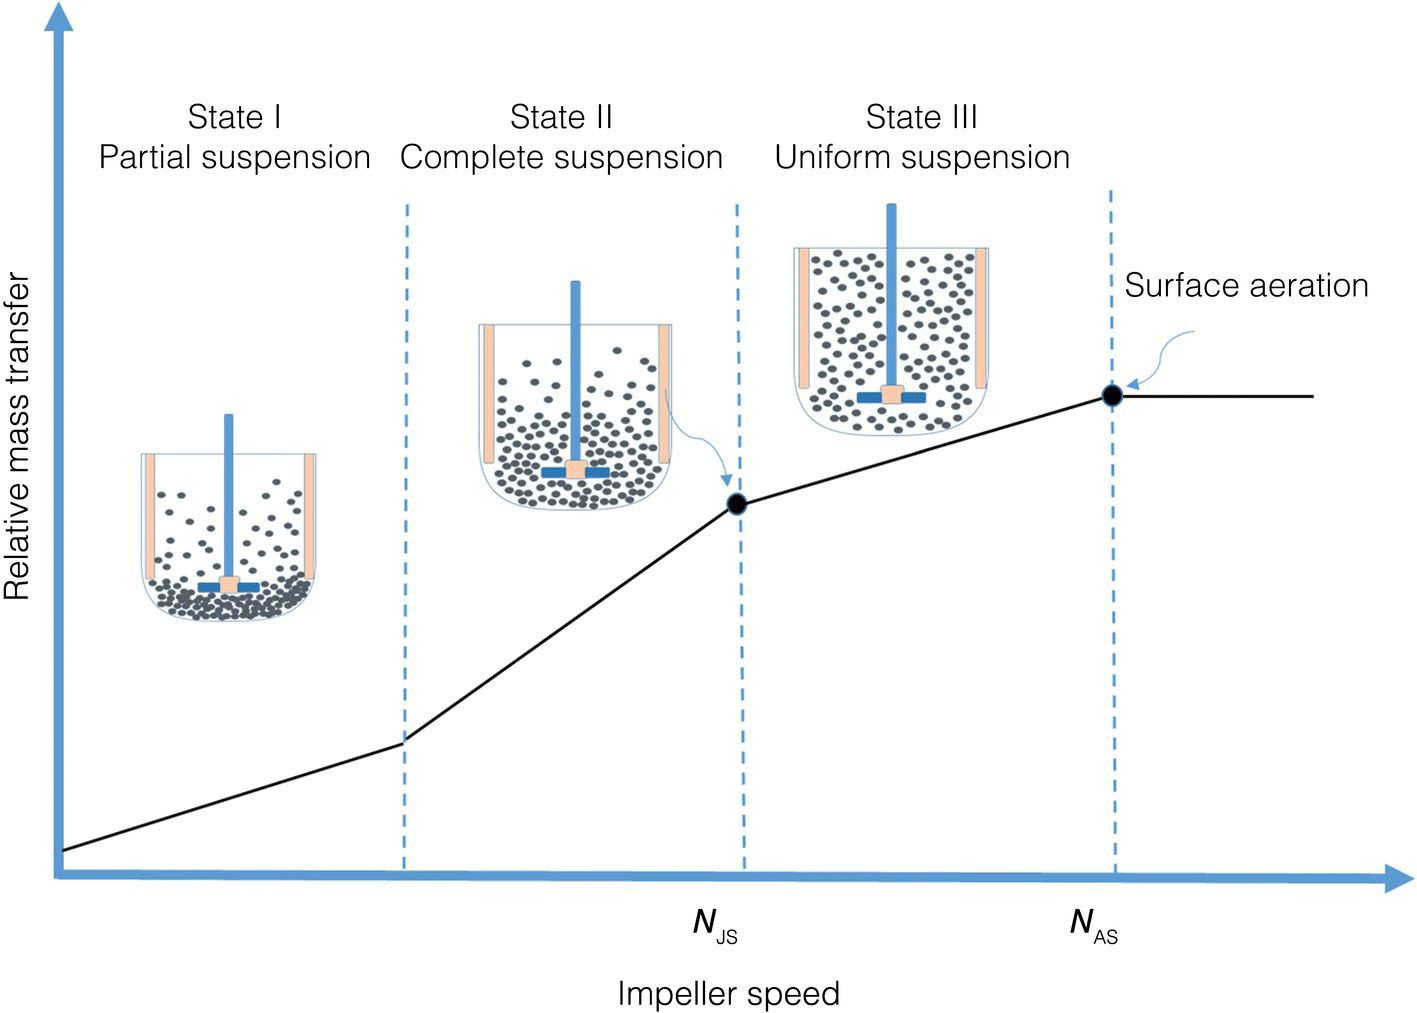 Relative mass transfer vs. impeller speed displaying an ascending curve with 3 dashed lines delineating 3 states (partial, complete, and uniform suspension). Each state has a schematic of a stir tank containing dots.